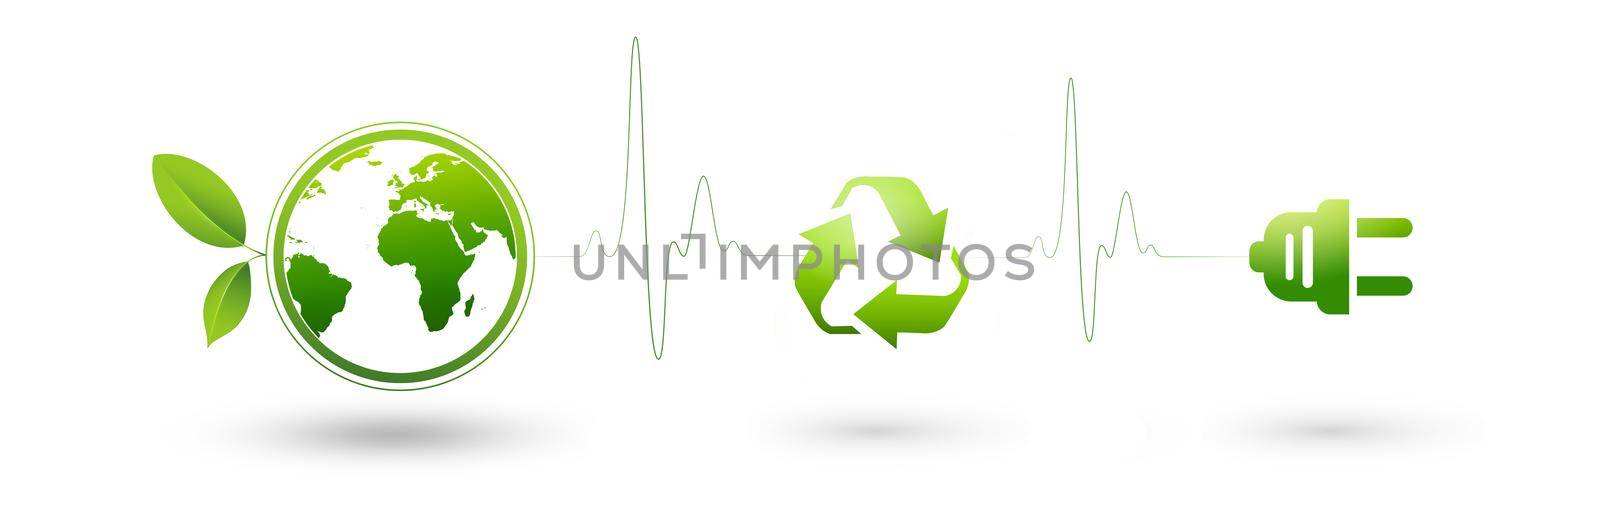 Renewable energy concept, recycling symbol, clean energy and sustainable development isolated on white background, illustration by thanumporn